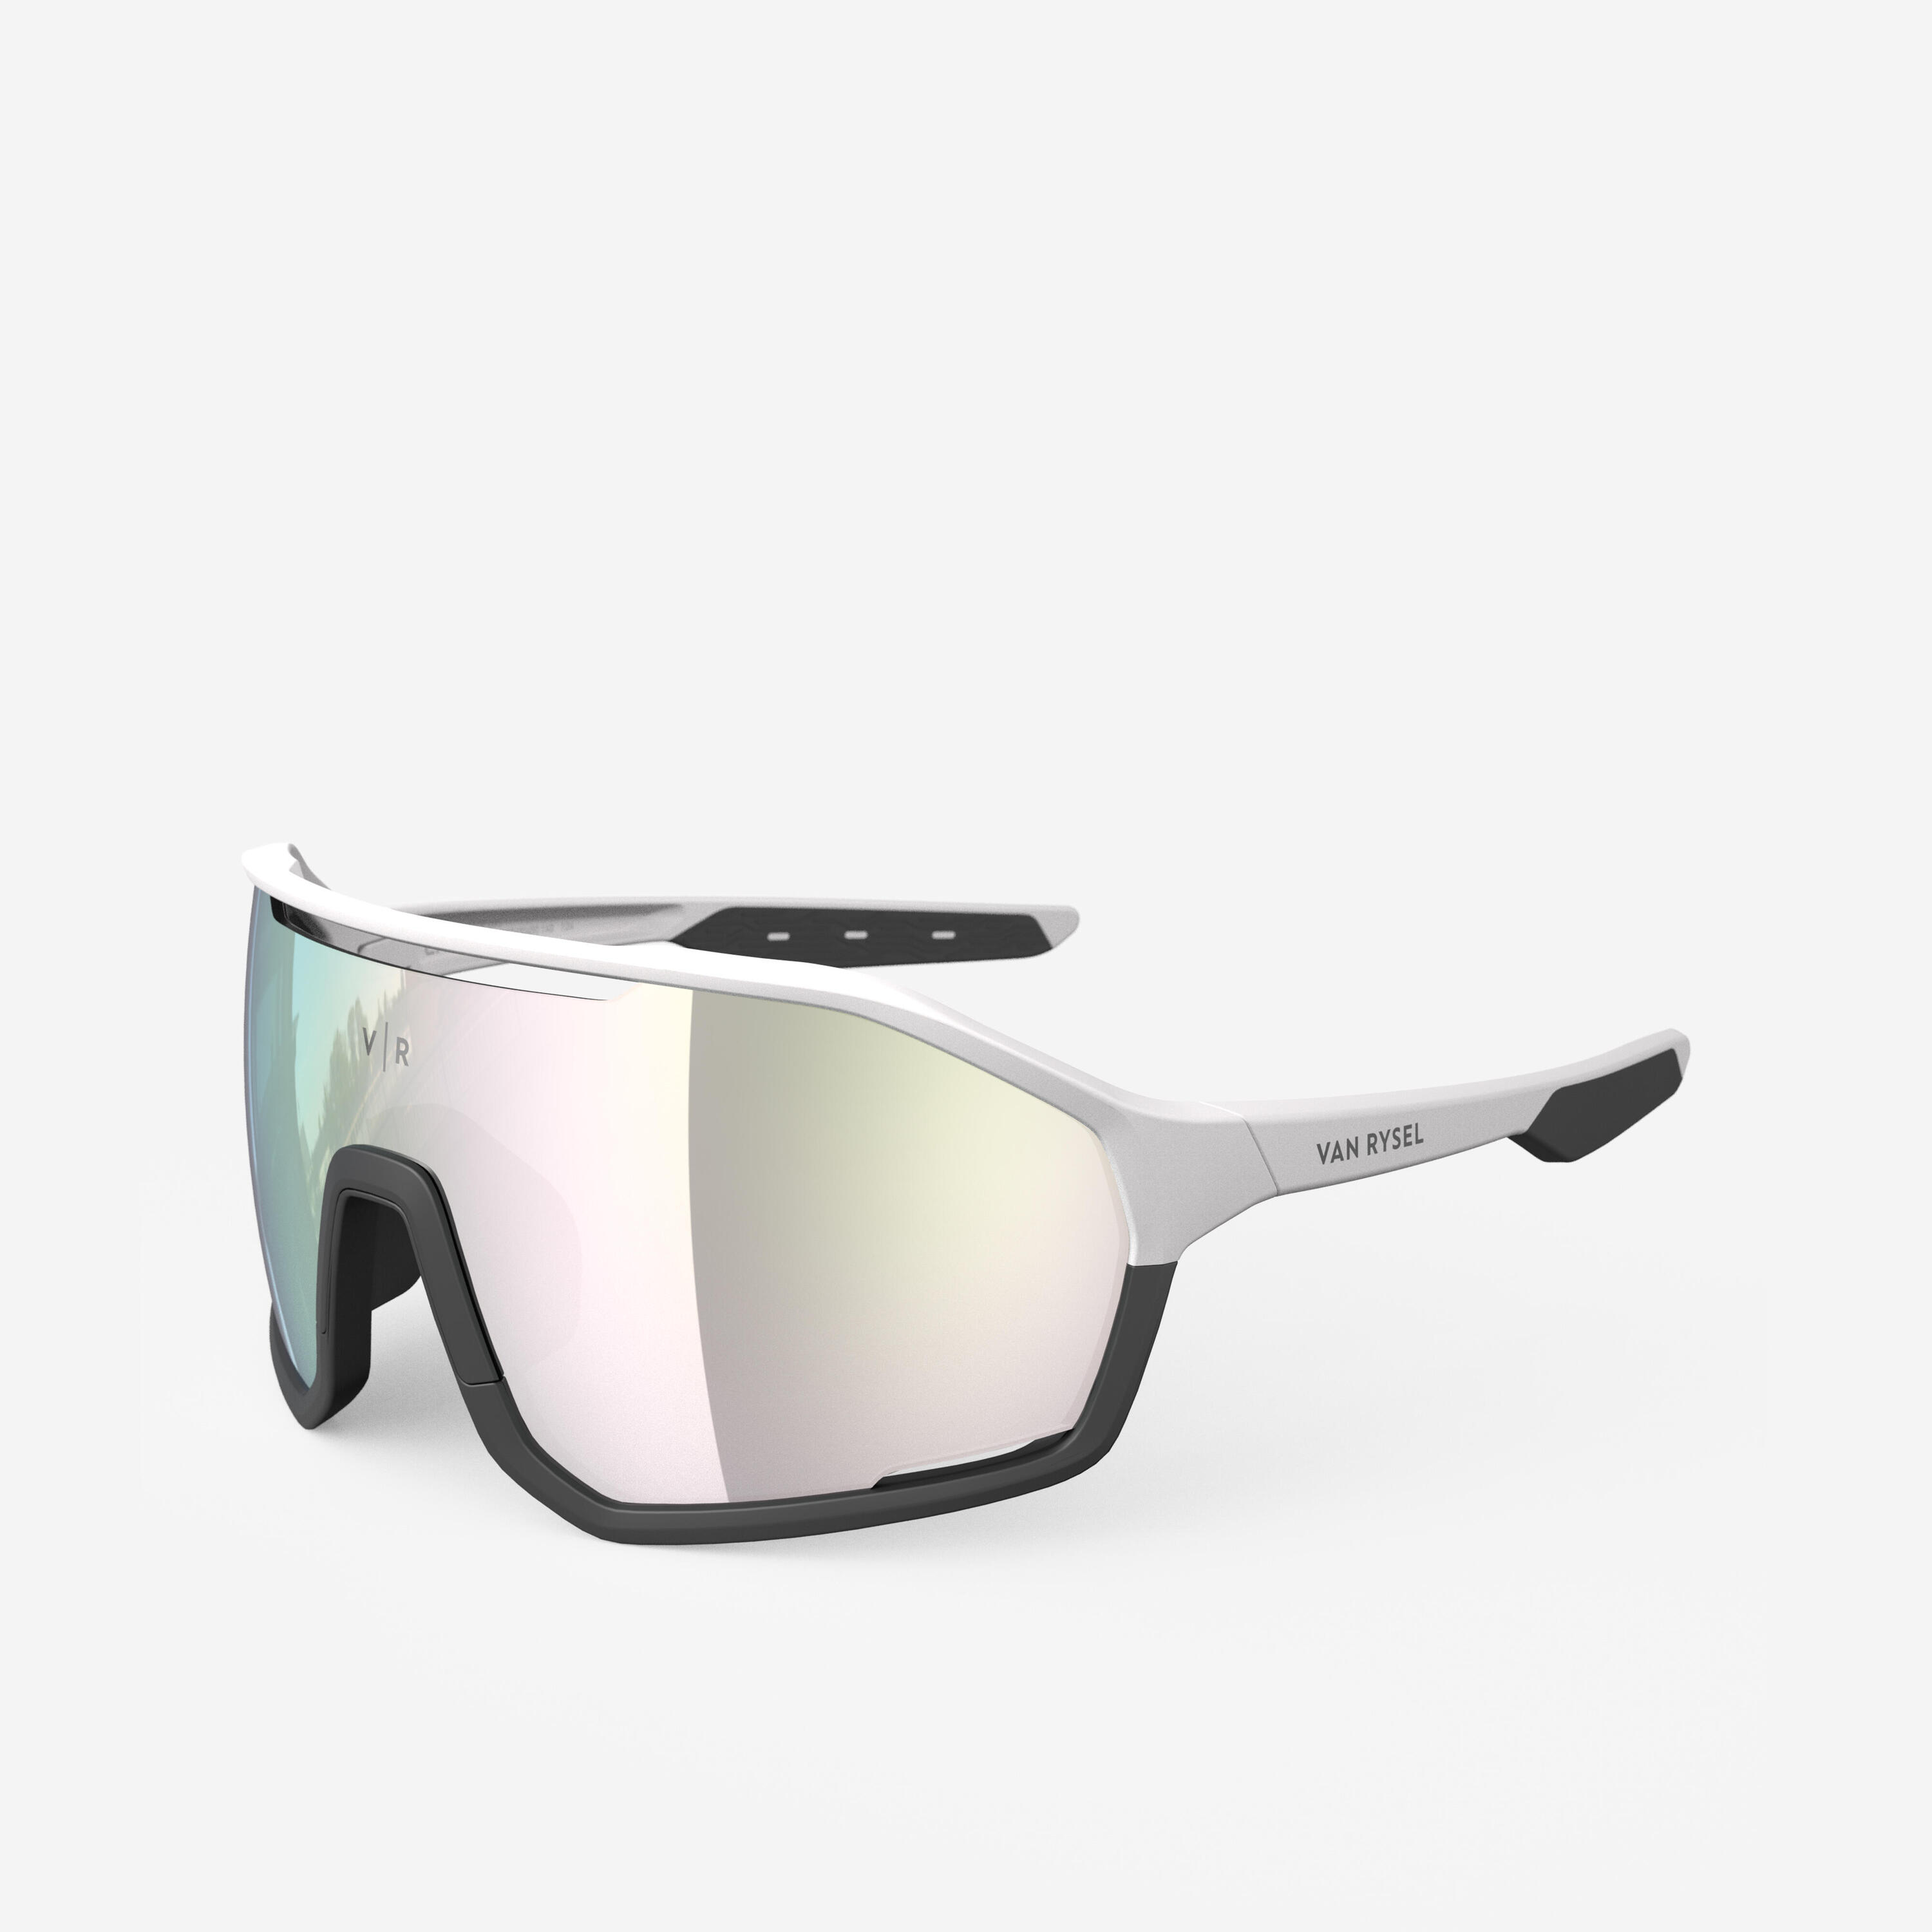 Adult Category 3 Cycling Sunglasses Perf 500 - White 1/7